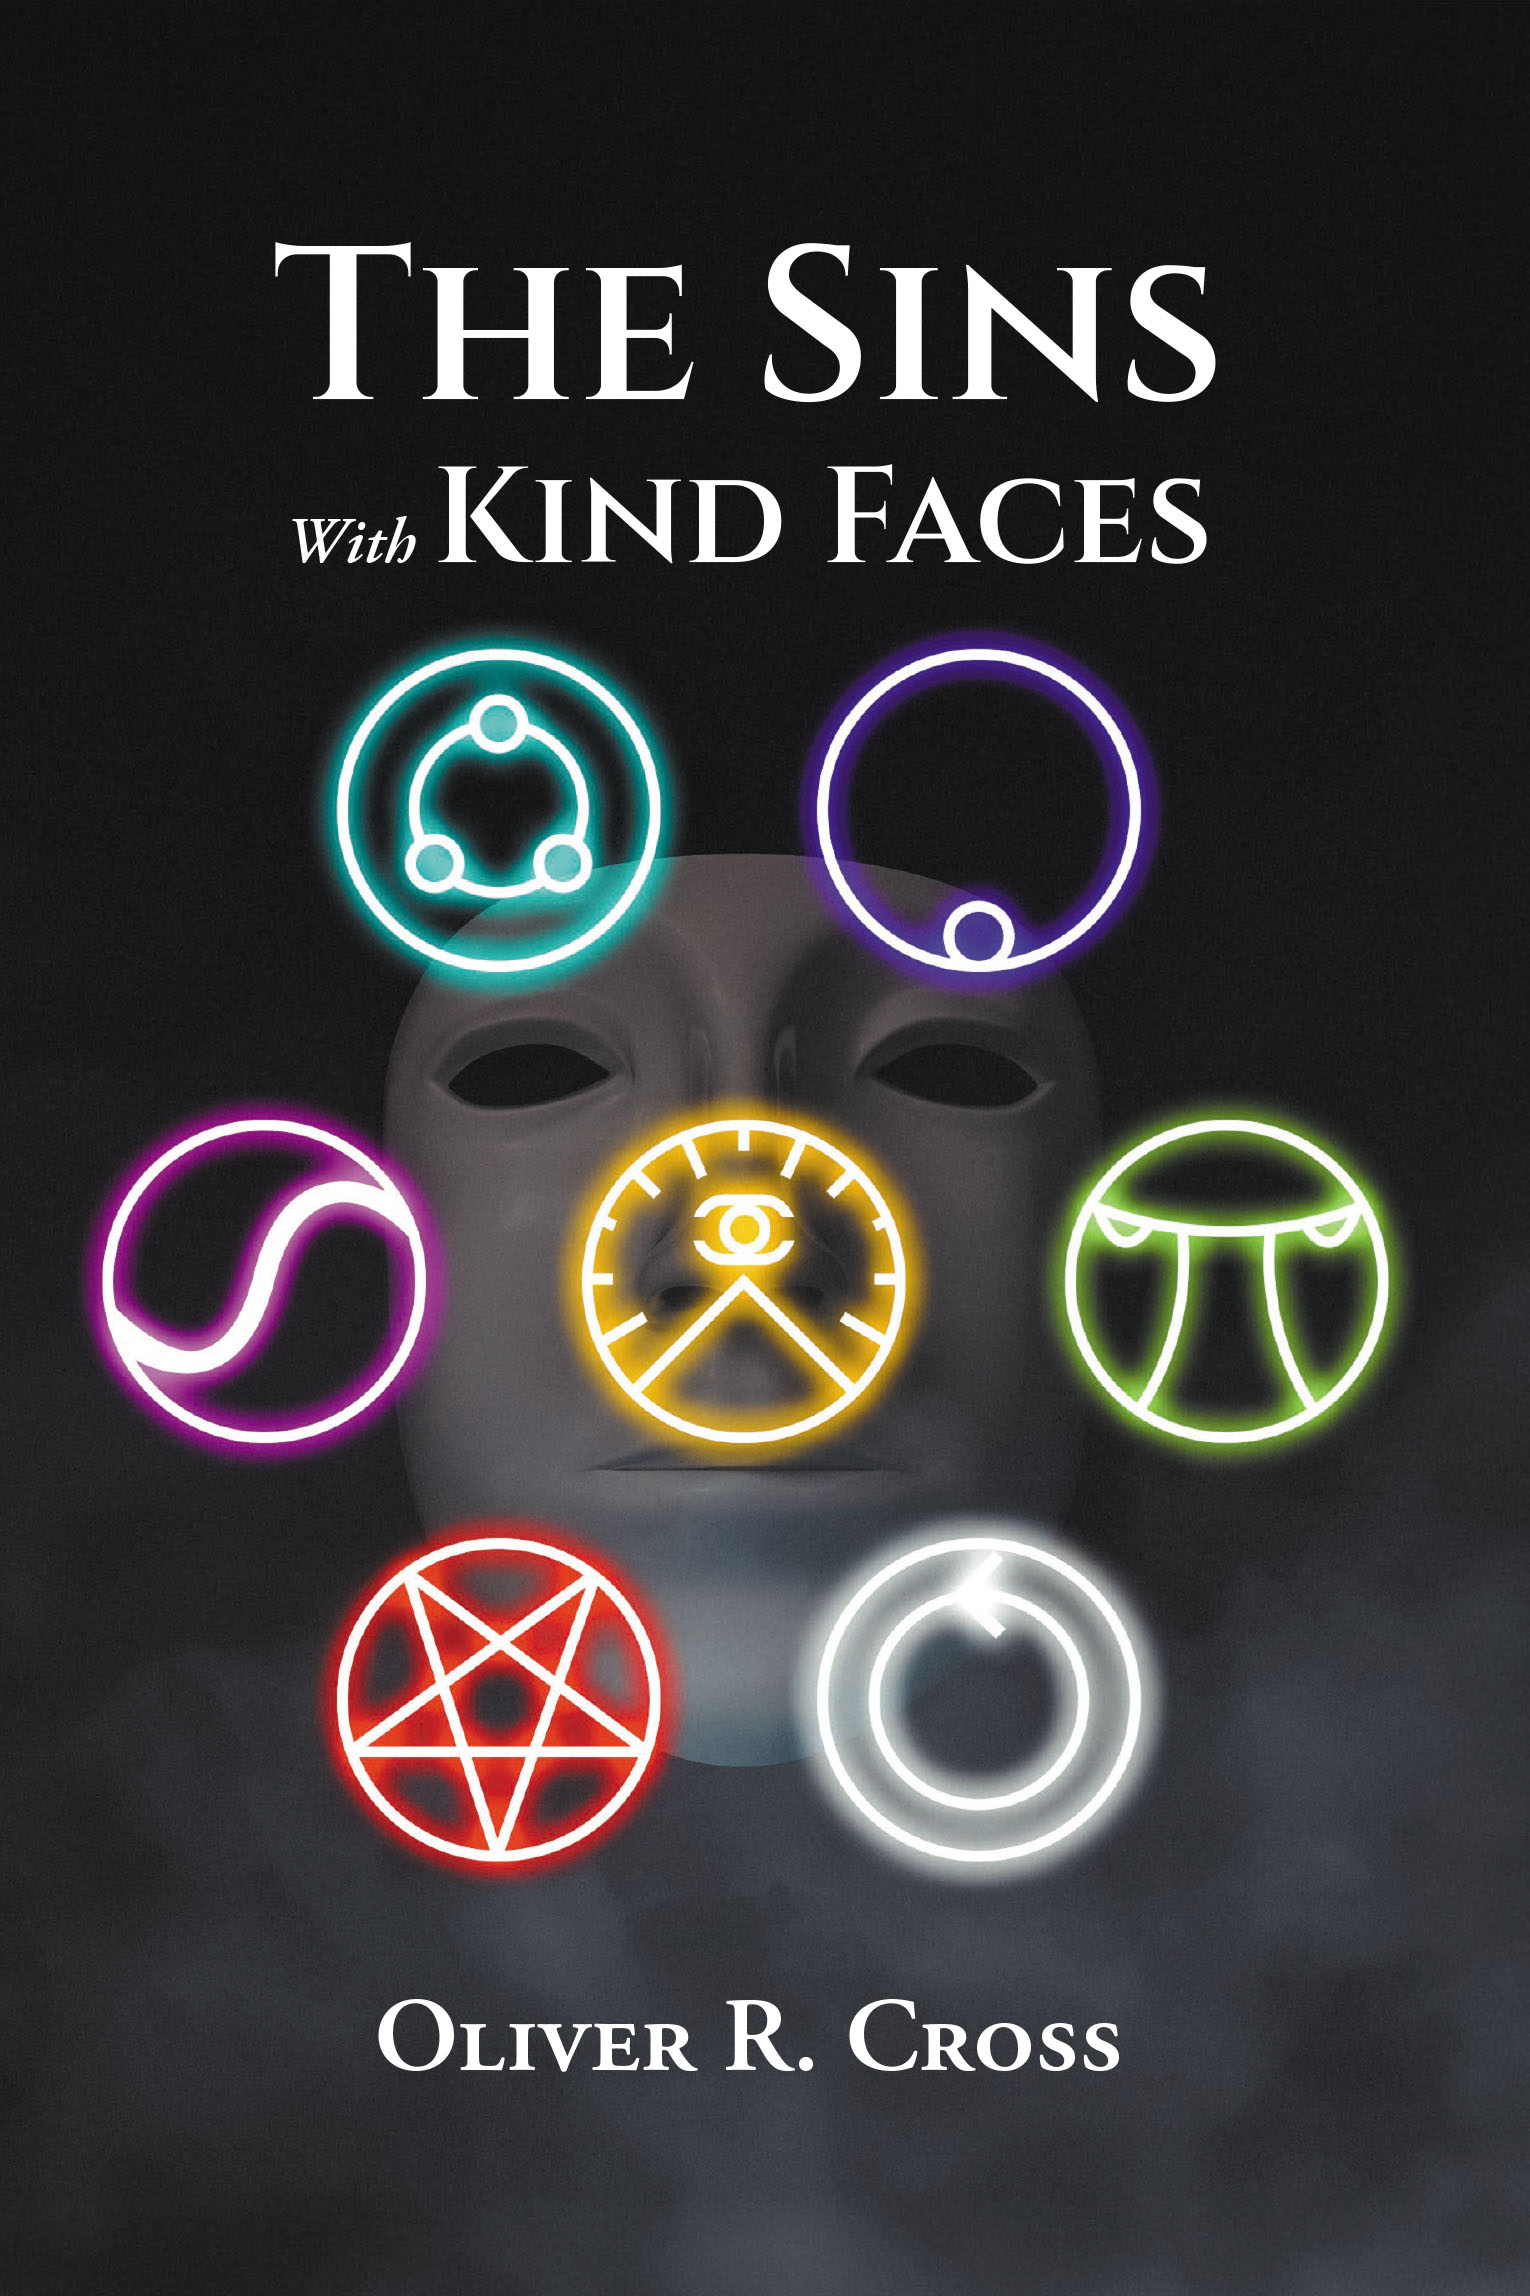 Author Oliver R. Cross’s New Book, "The Sins with Kind Faces," Follows a Secret Agent Sworn to Help Humans and the Supernatural as She Deals with the Seven Deadly Sins